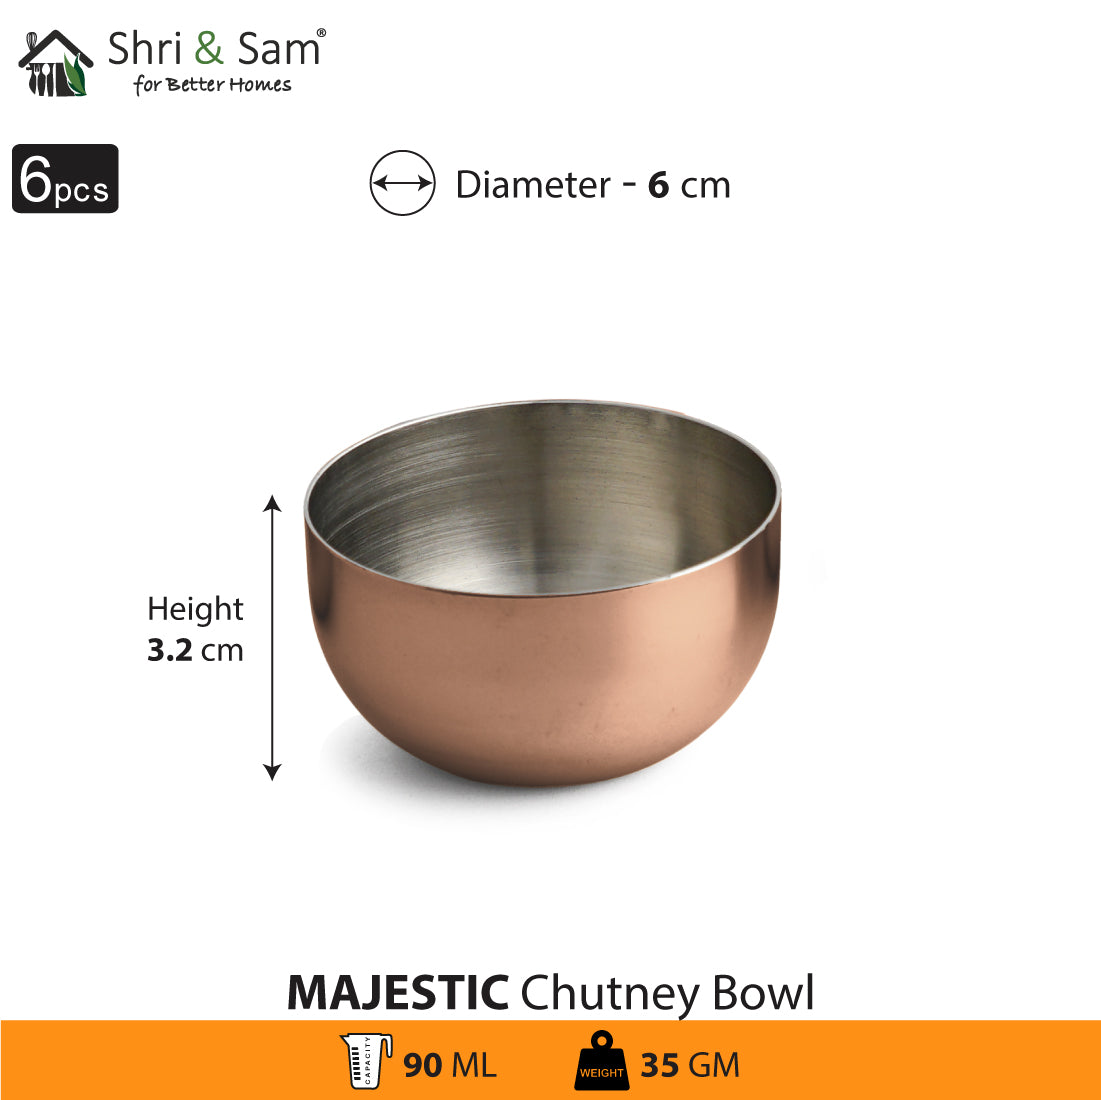 Stainless Steel 6 PCS Chutney Bowl with Rose Gold PVD Coating Majestic